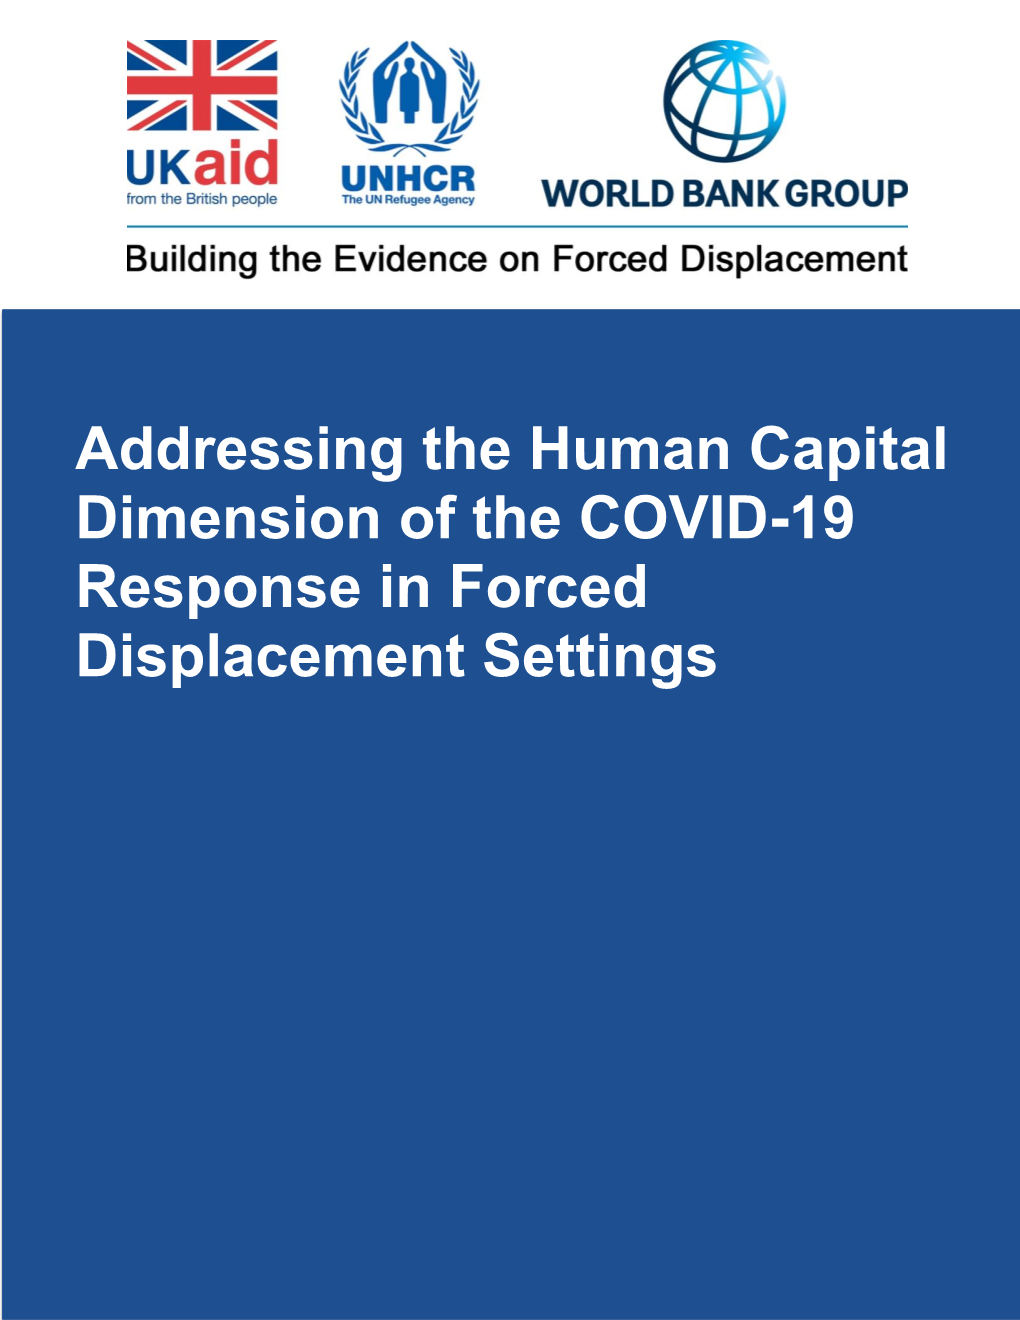 Addressing the Human Capital Dimension of the COVID-19 Response in Forced Displacement Settings